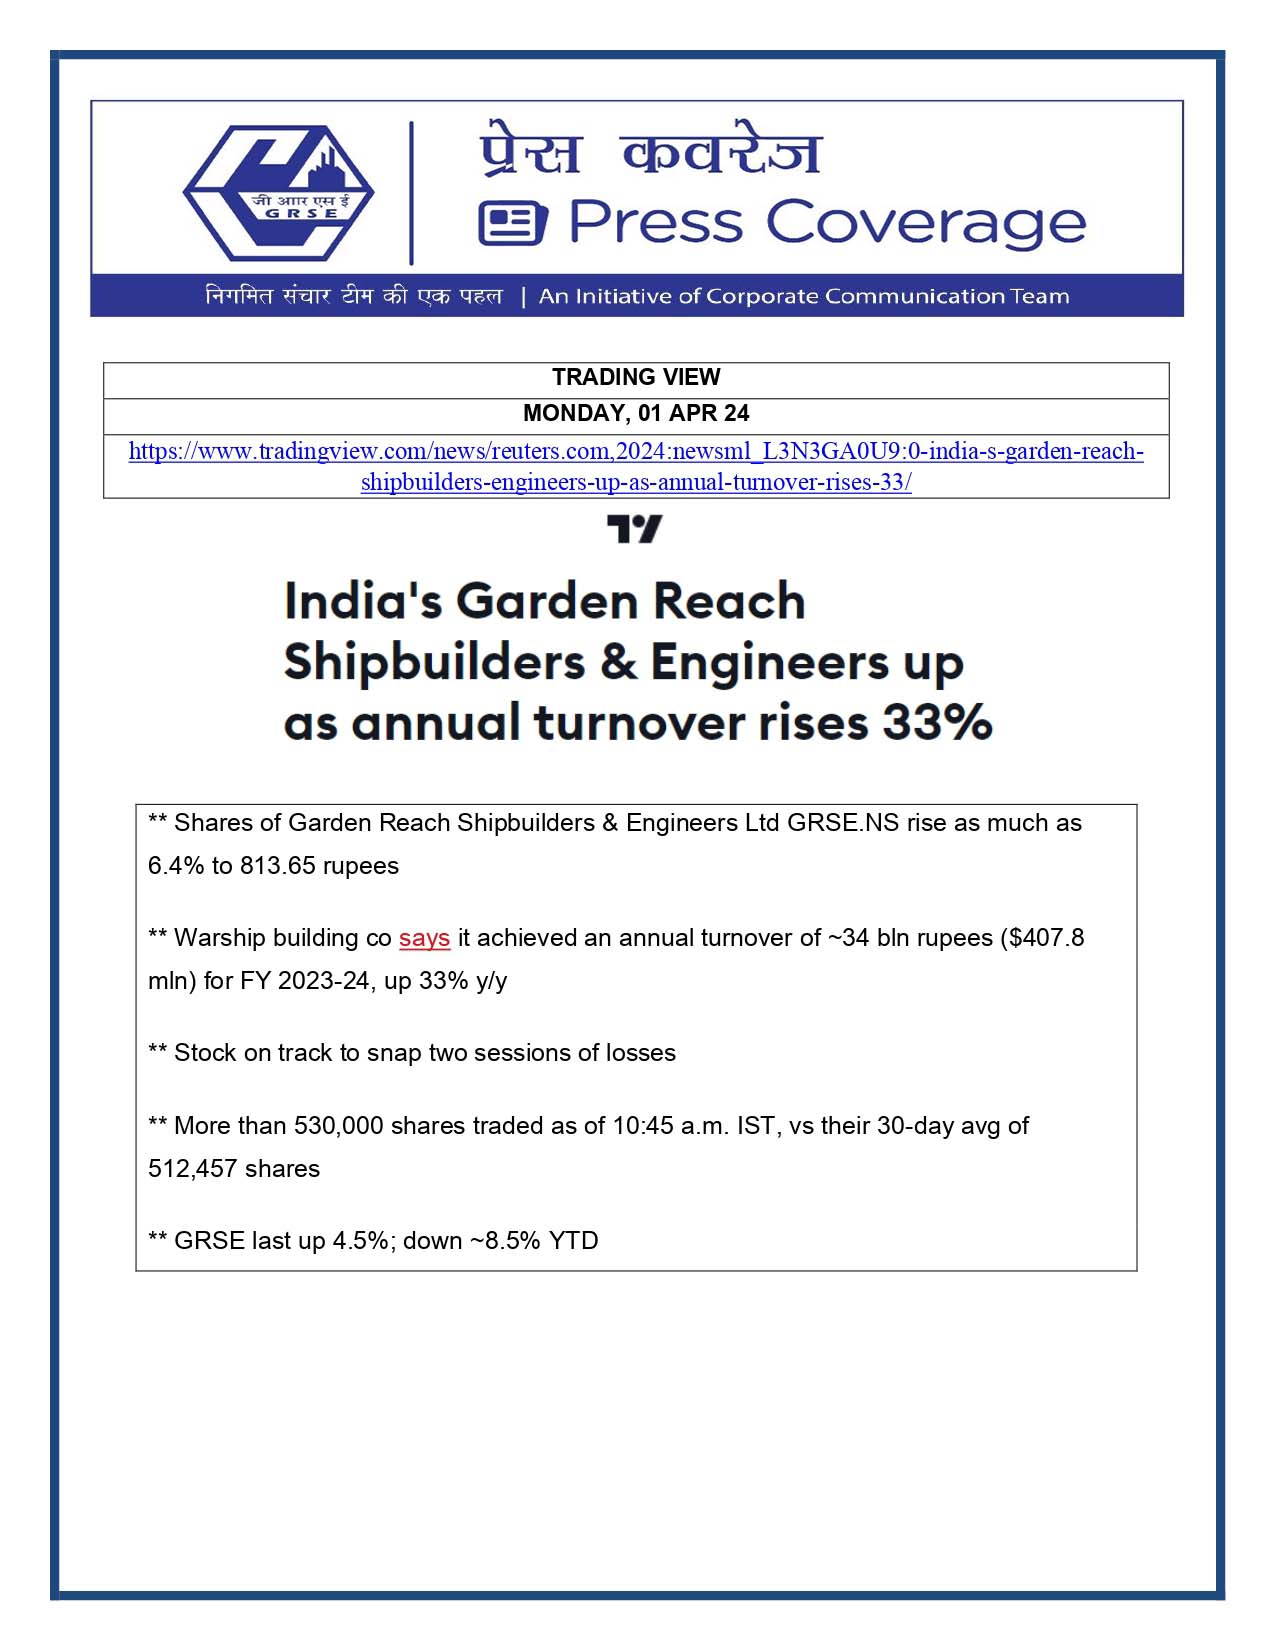 Press Coverage : Trading View, 01 Apr 24 : Garden Reach Shipbuilders & Engineers annual turnover rises up to 33%